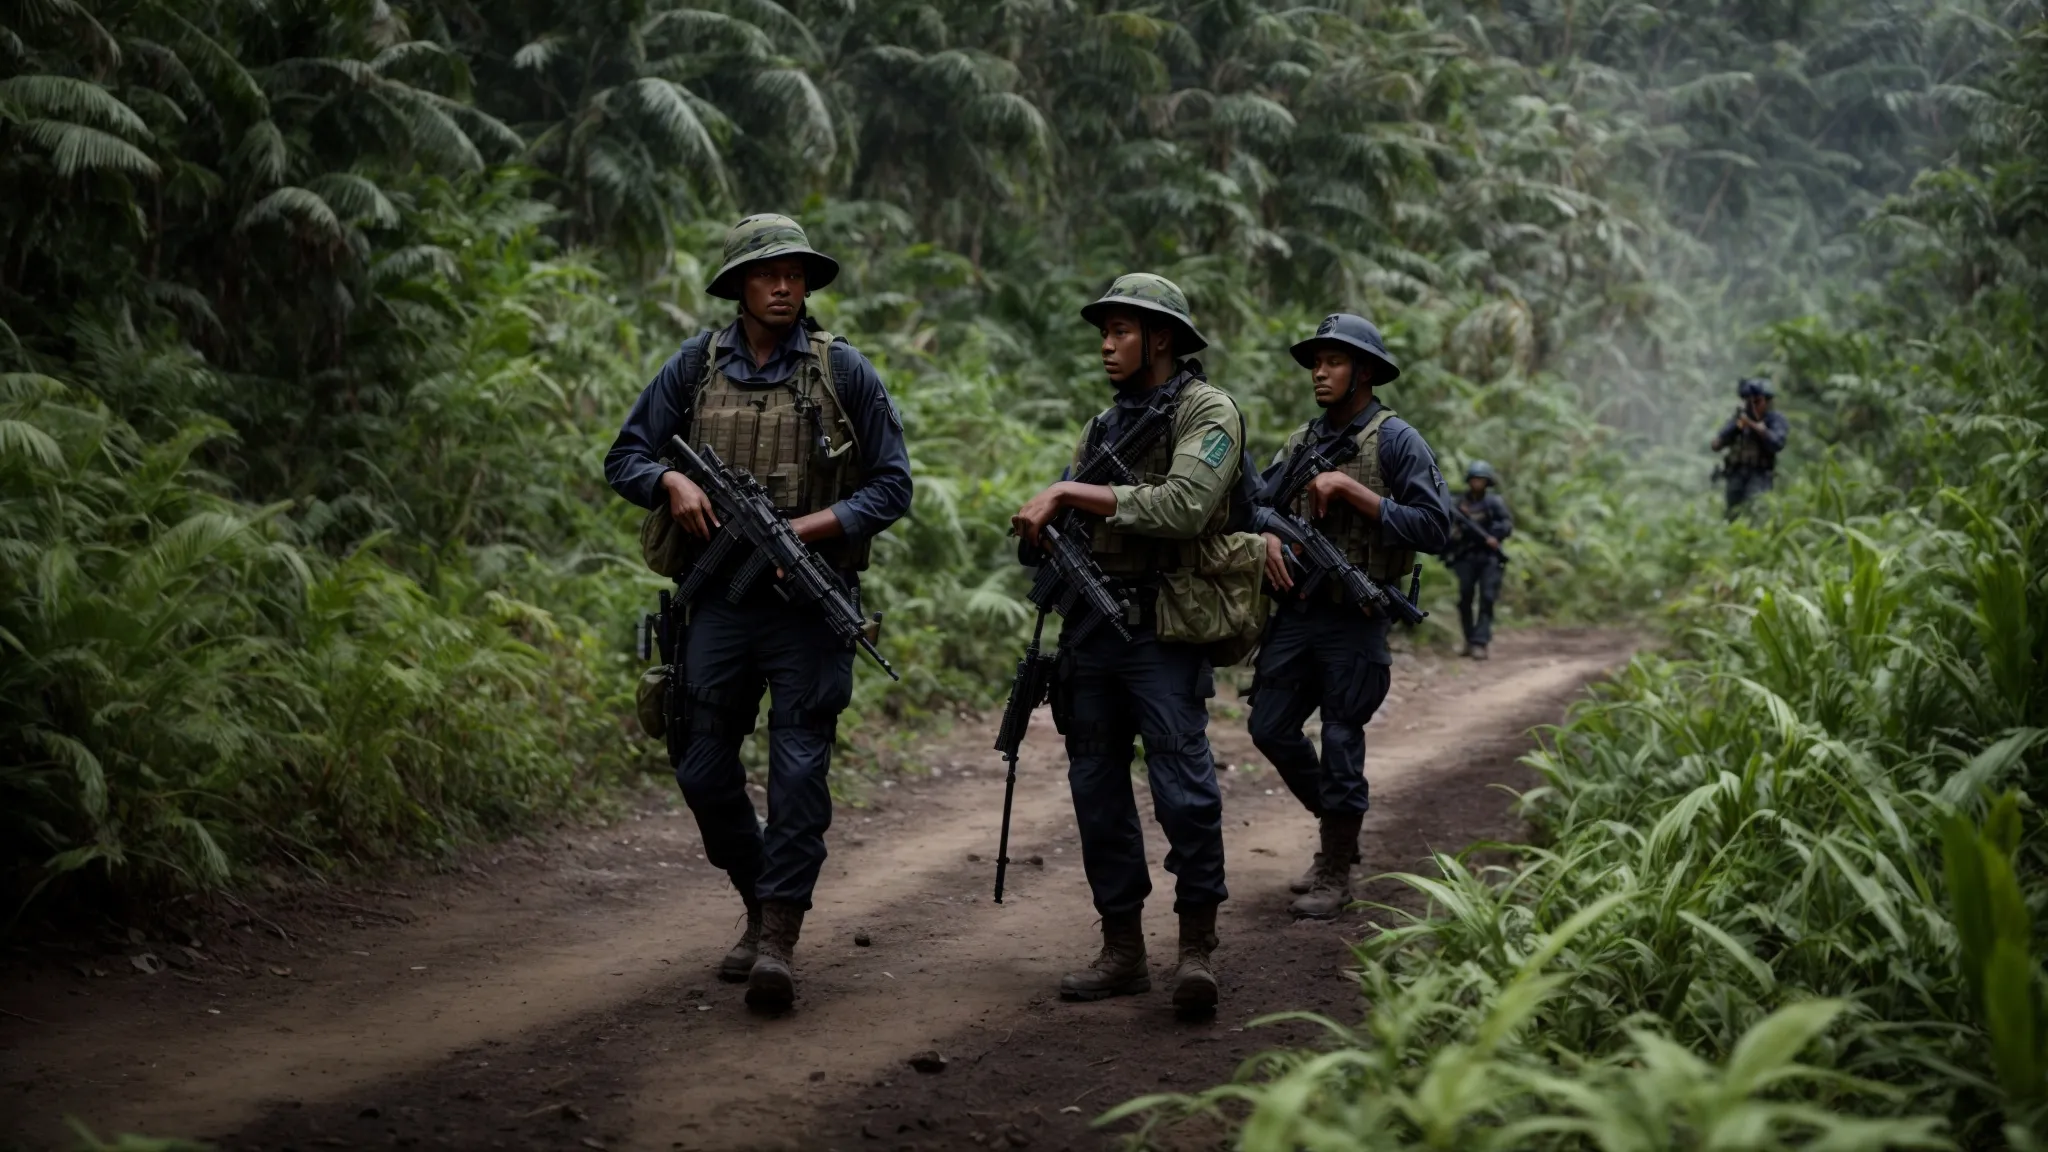 armed militants patrol a jungle region, signaling the presence of rebel factions vying for control within ecuador's landscape.